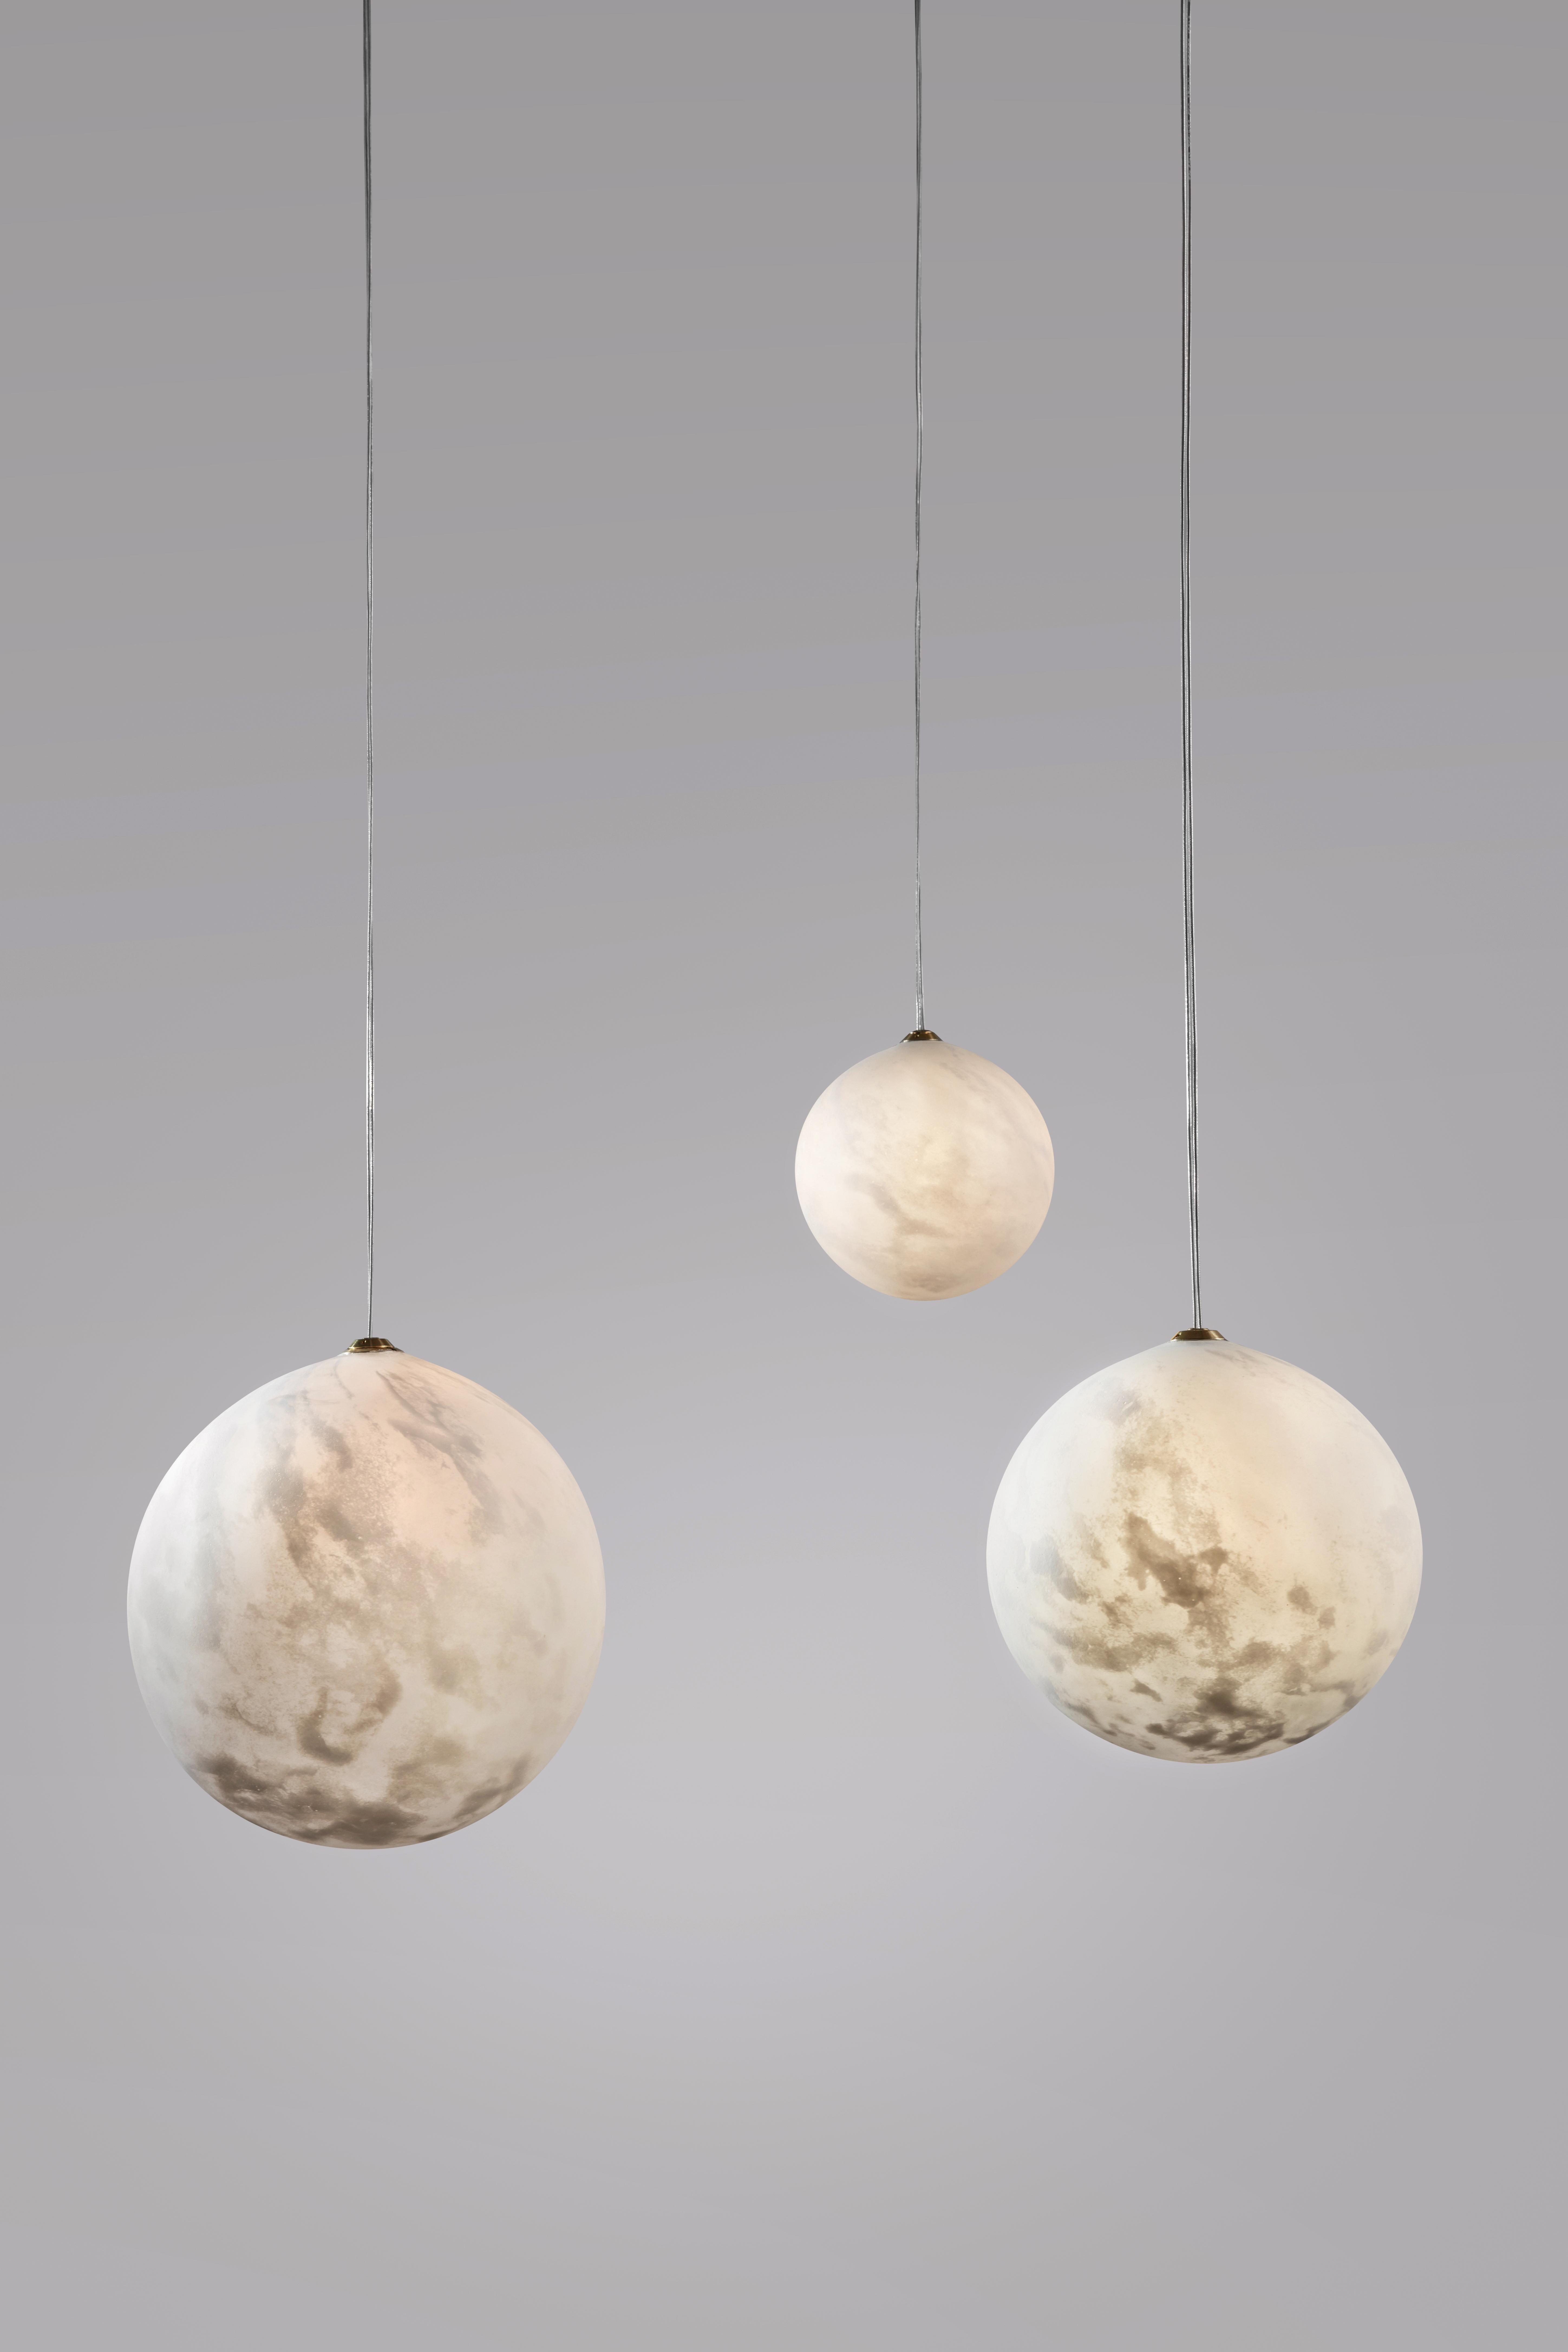 Hanging lights planets, Ludovic Clément d’Armont
Every creation of Ludovic Clément d’Armont can be made to order in any requested dimensions.
Blown glass
Dimensions of the planets can vary in the following dimensions: 10 cm, 14 cm, 18 cm, 25 cm